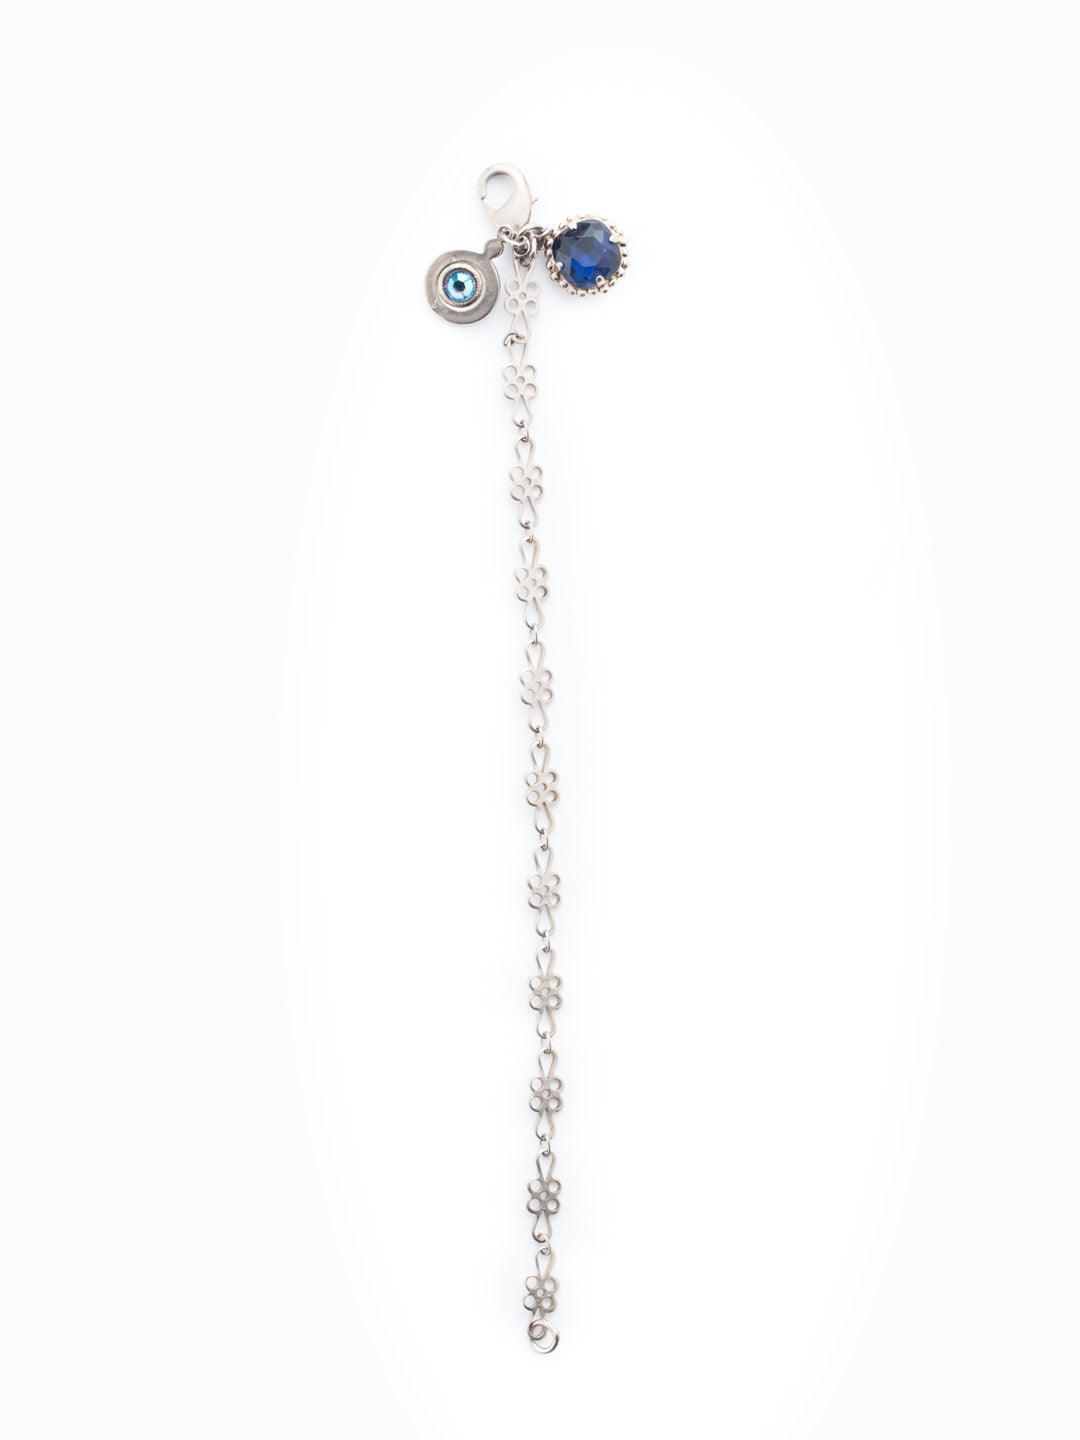 Chantal Charm Bracelet - BEU99ASEB - <p>Delicate eyelet bracelet, embellished with two charms; one a solitaire cut crystal the other a pendant. From Sorrelli's Electric Blue collection in our Antique Silver-tone finish.</p>